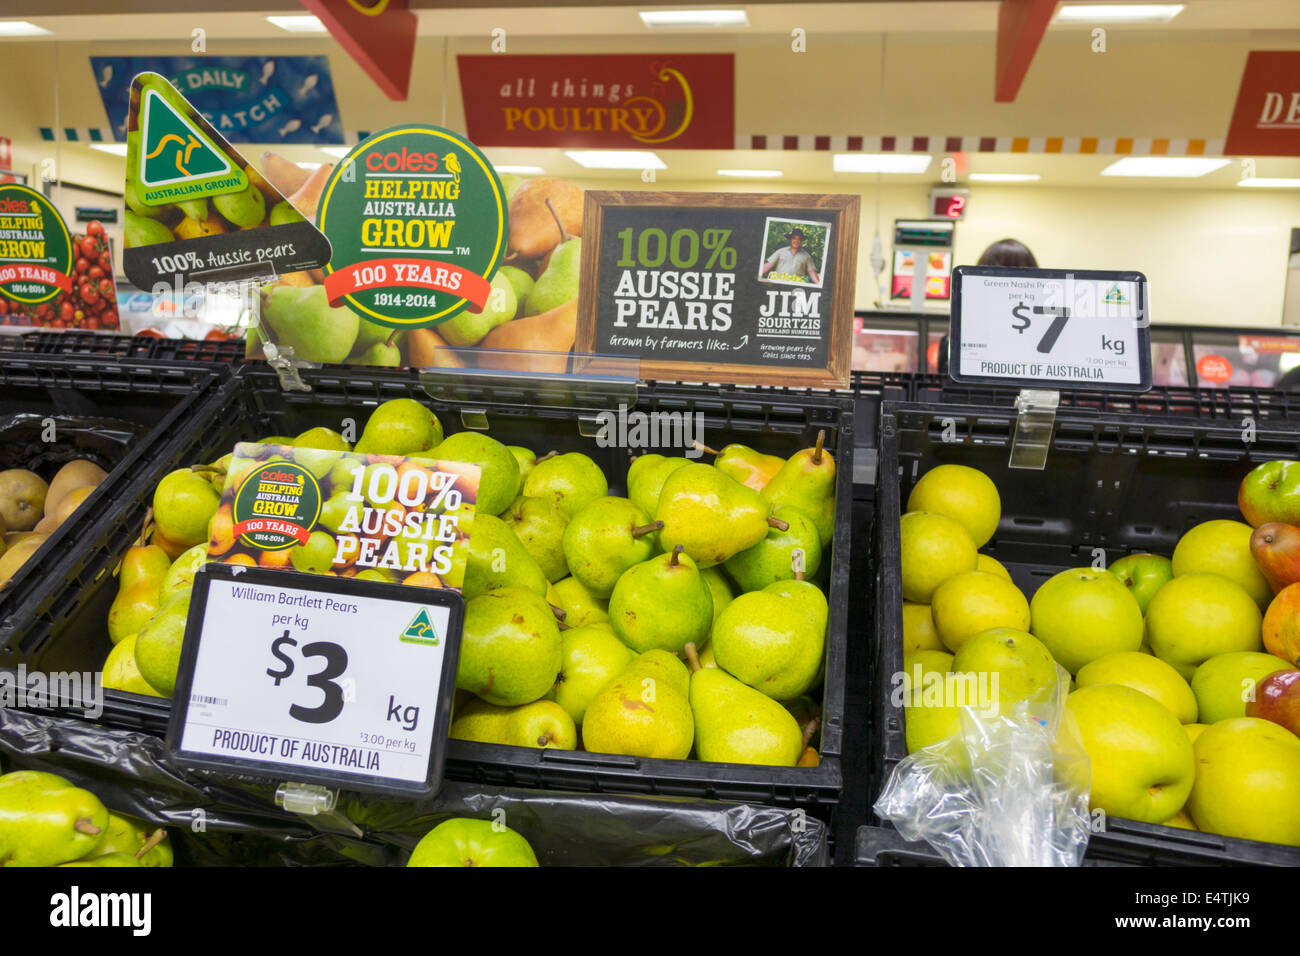 Melbourne Australia,Victoria CBD Central Business,District,Coles Central,grocery store,supermarket,food,product products display sale,produce,pears,pr Stock Photo